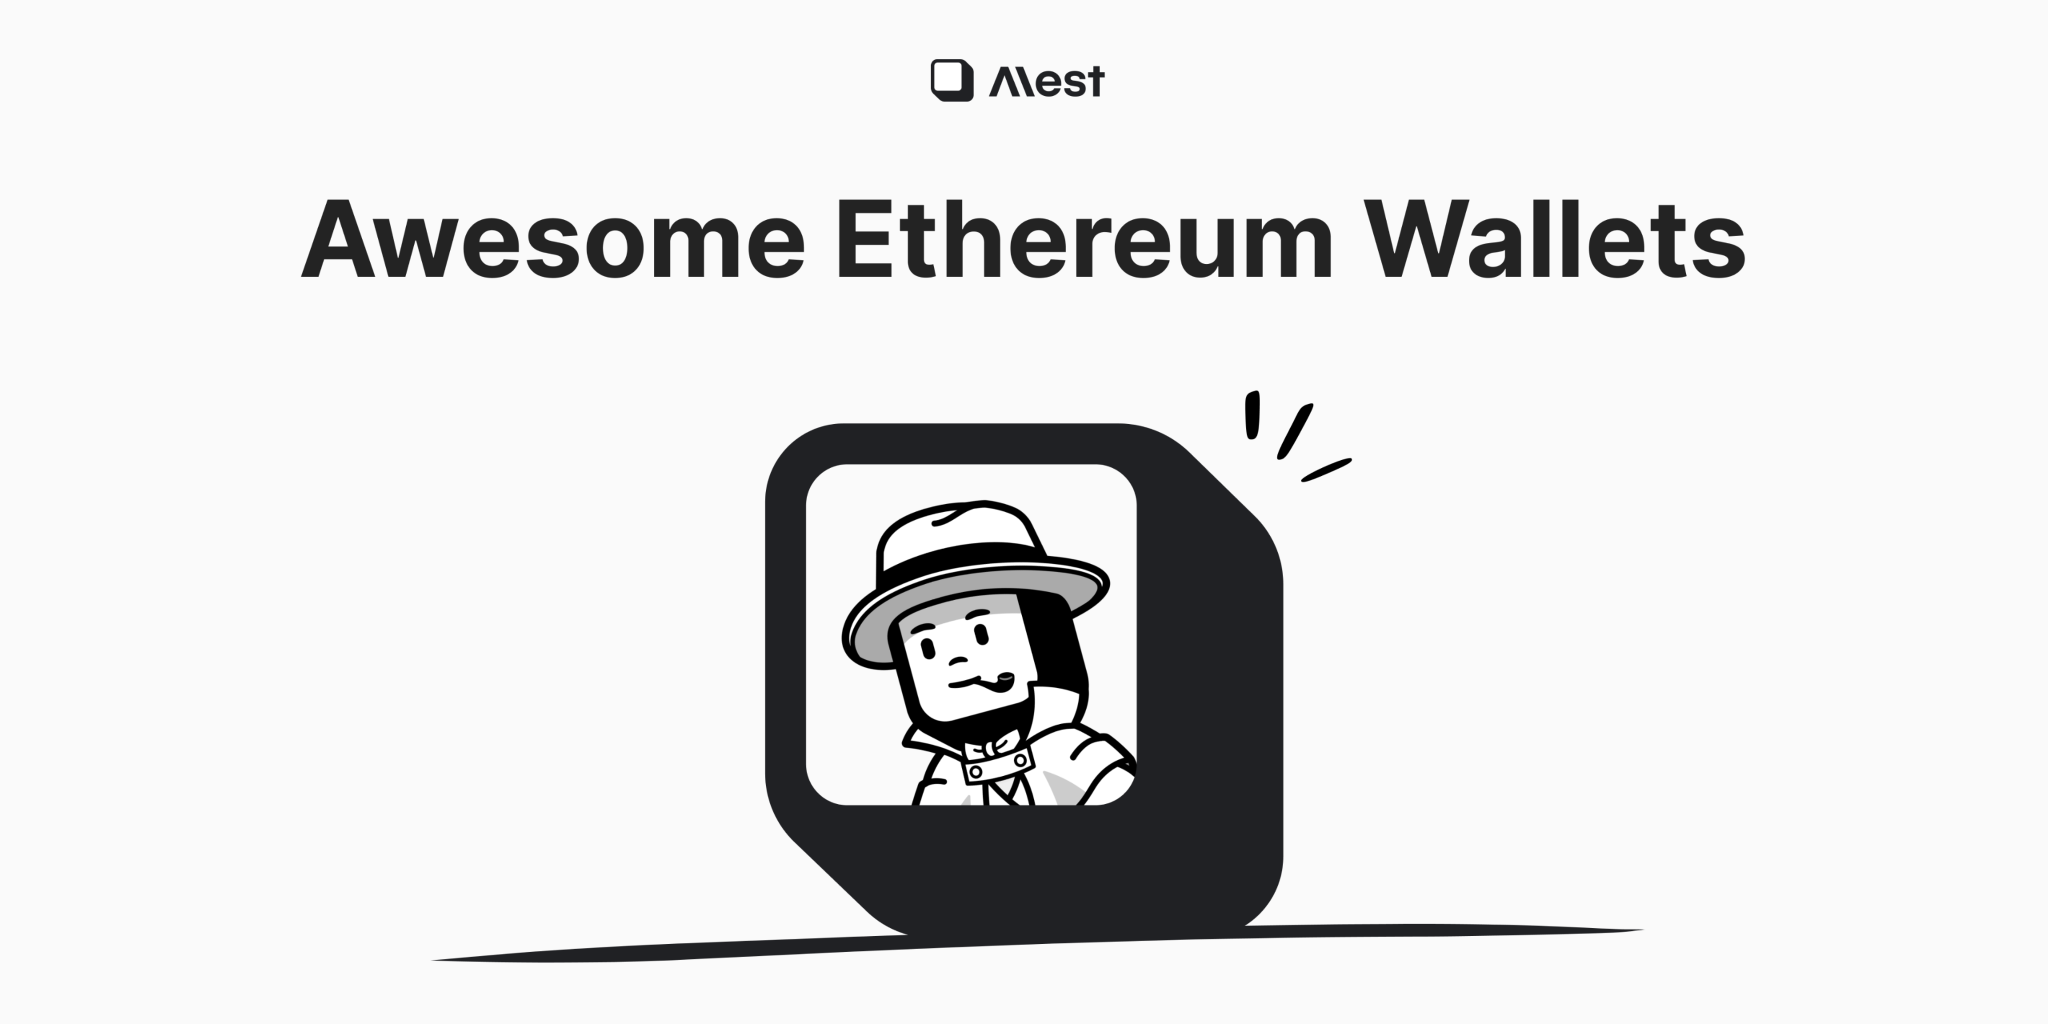 Awesome Ethereum Wallets